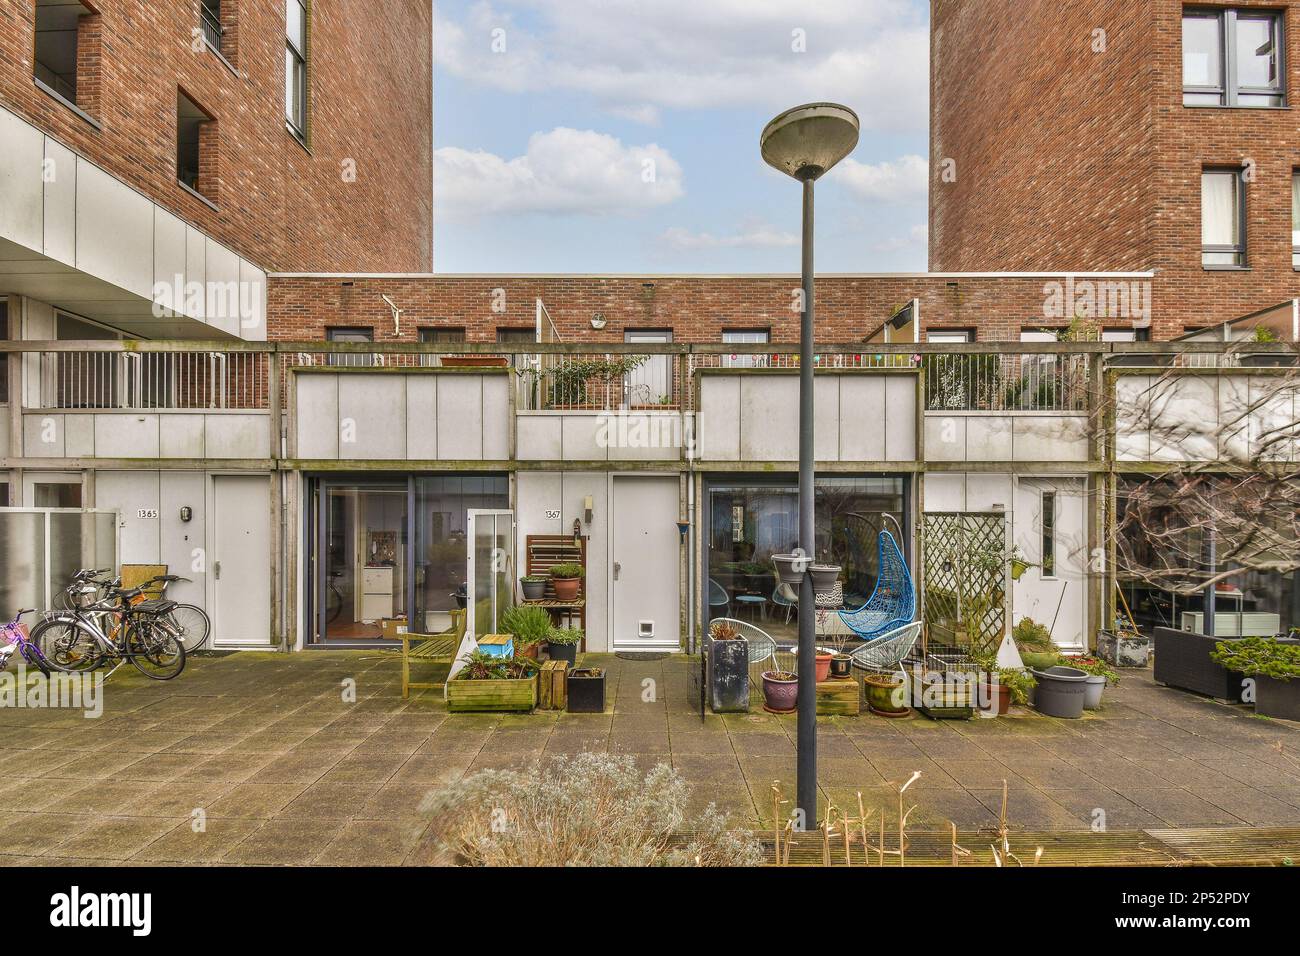 Amsterdam, Netherlands - 10 April, 2021: an apartment complex with bikes parked in the yard and two balks on the other side of the building, Stock Photo